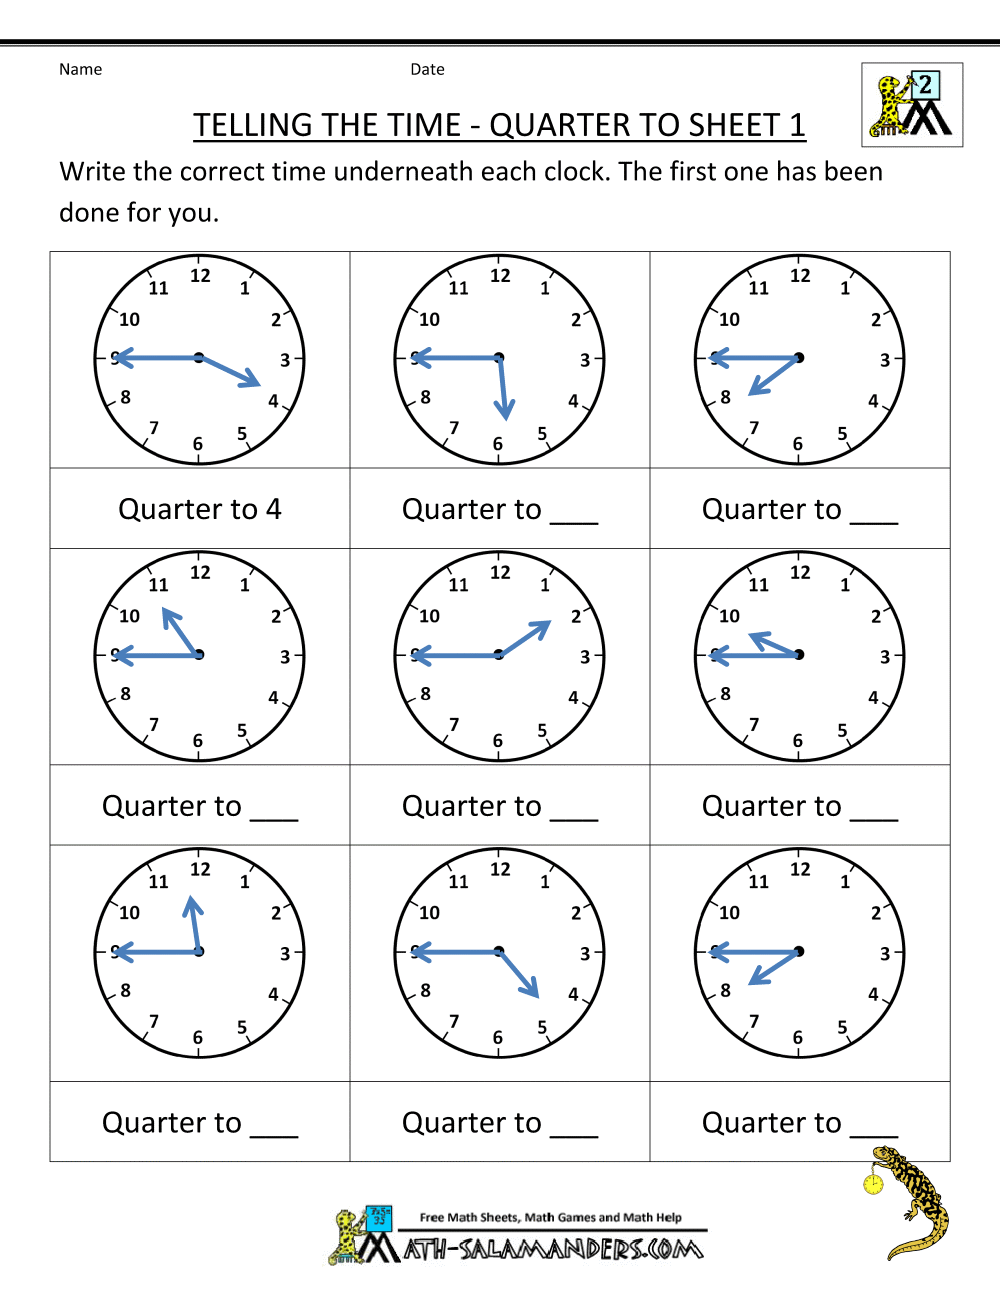 Telling Time Worksheets Telling The Time Quarter To 1